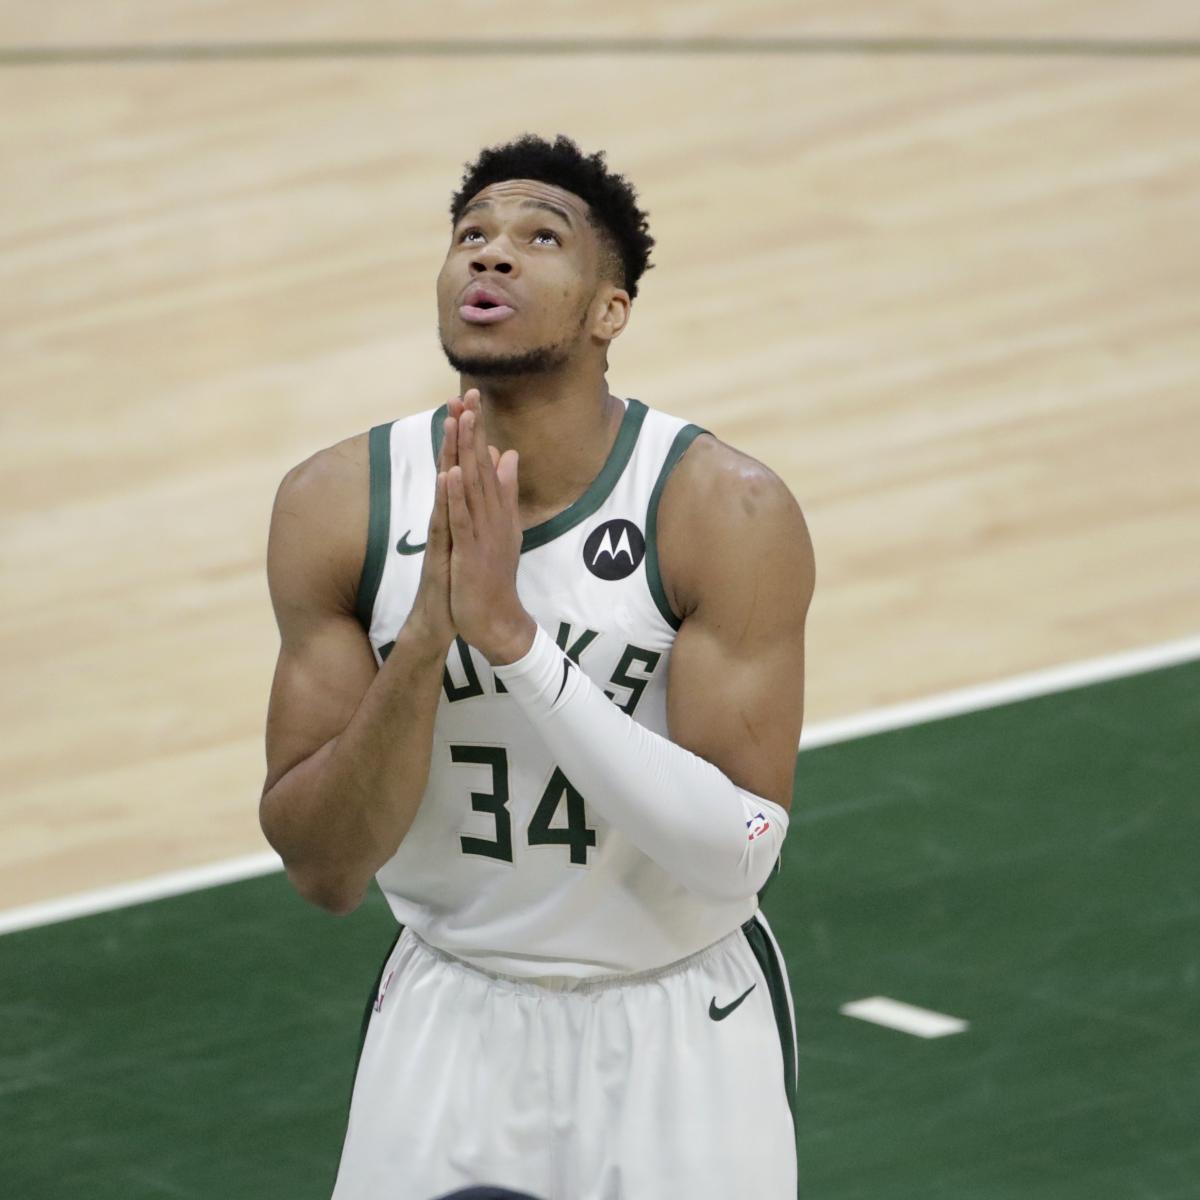 Giannis Antetokounmpo's Uncertain NBA Future: Could He Make a Game-Changing Move to the Toronto Raptors in a Shocking Trade?